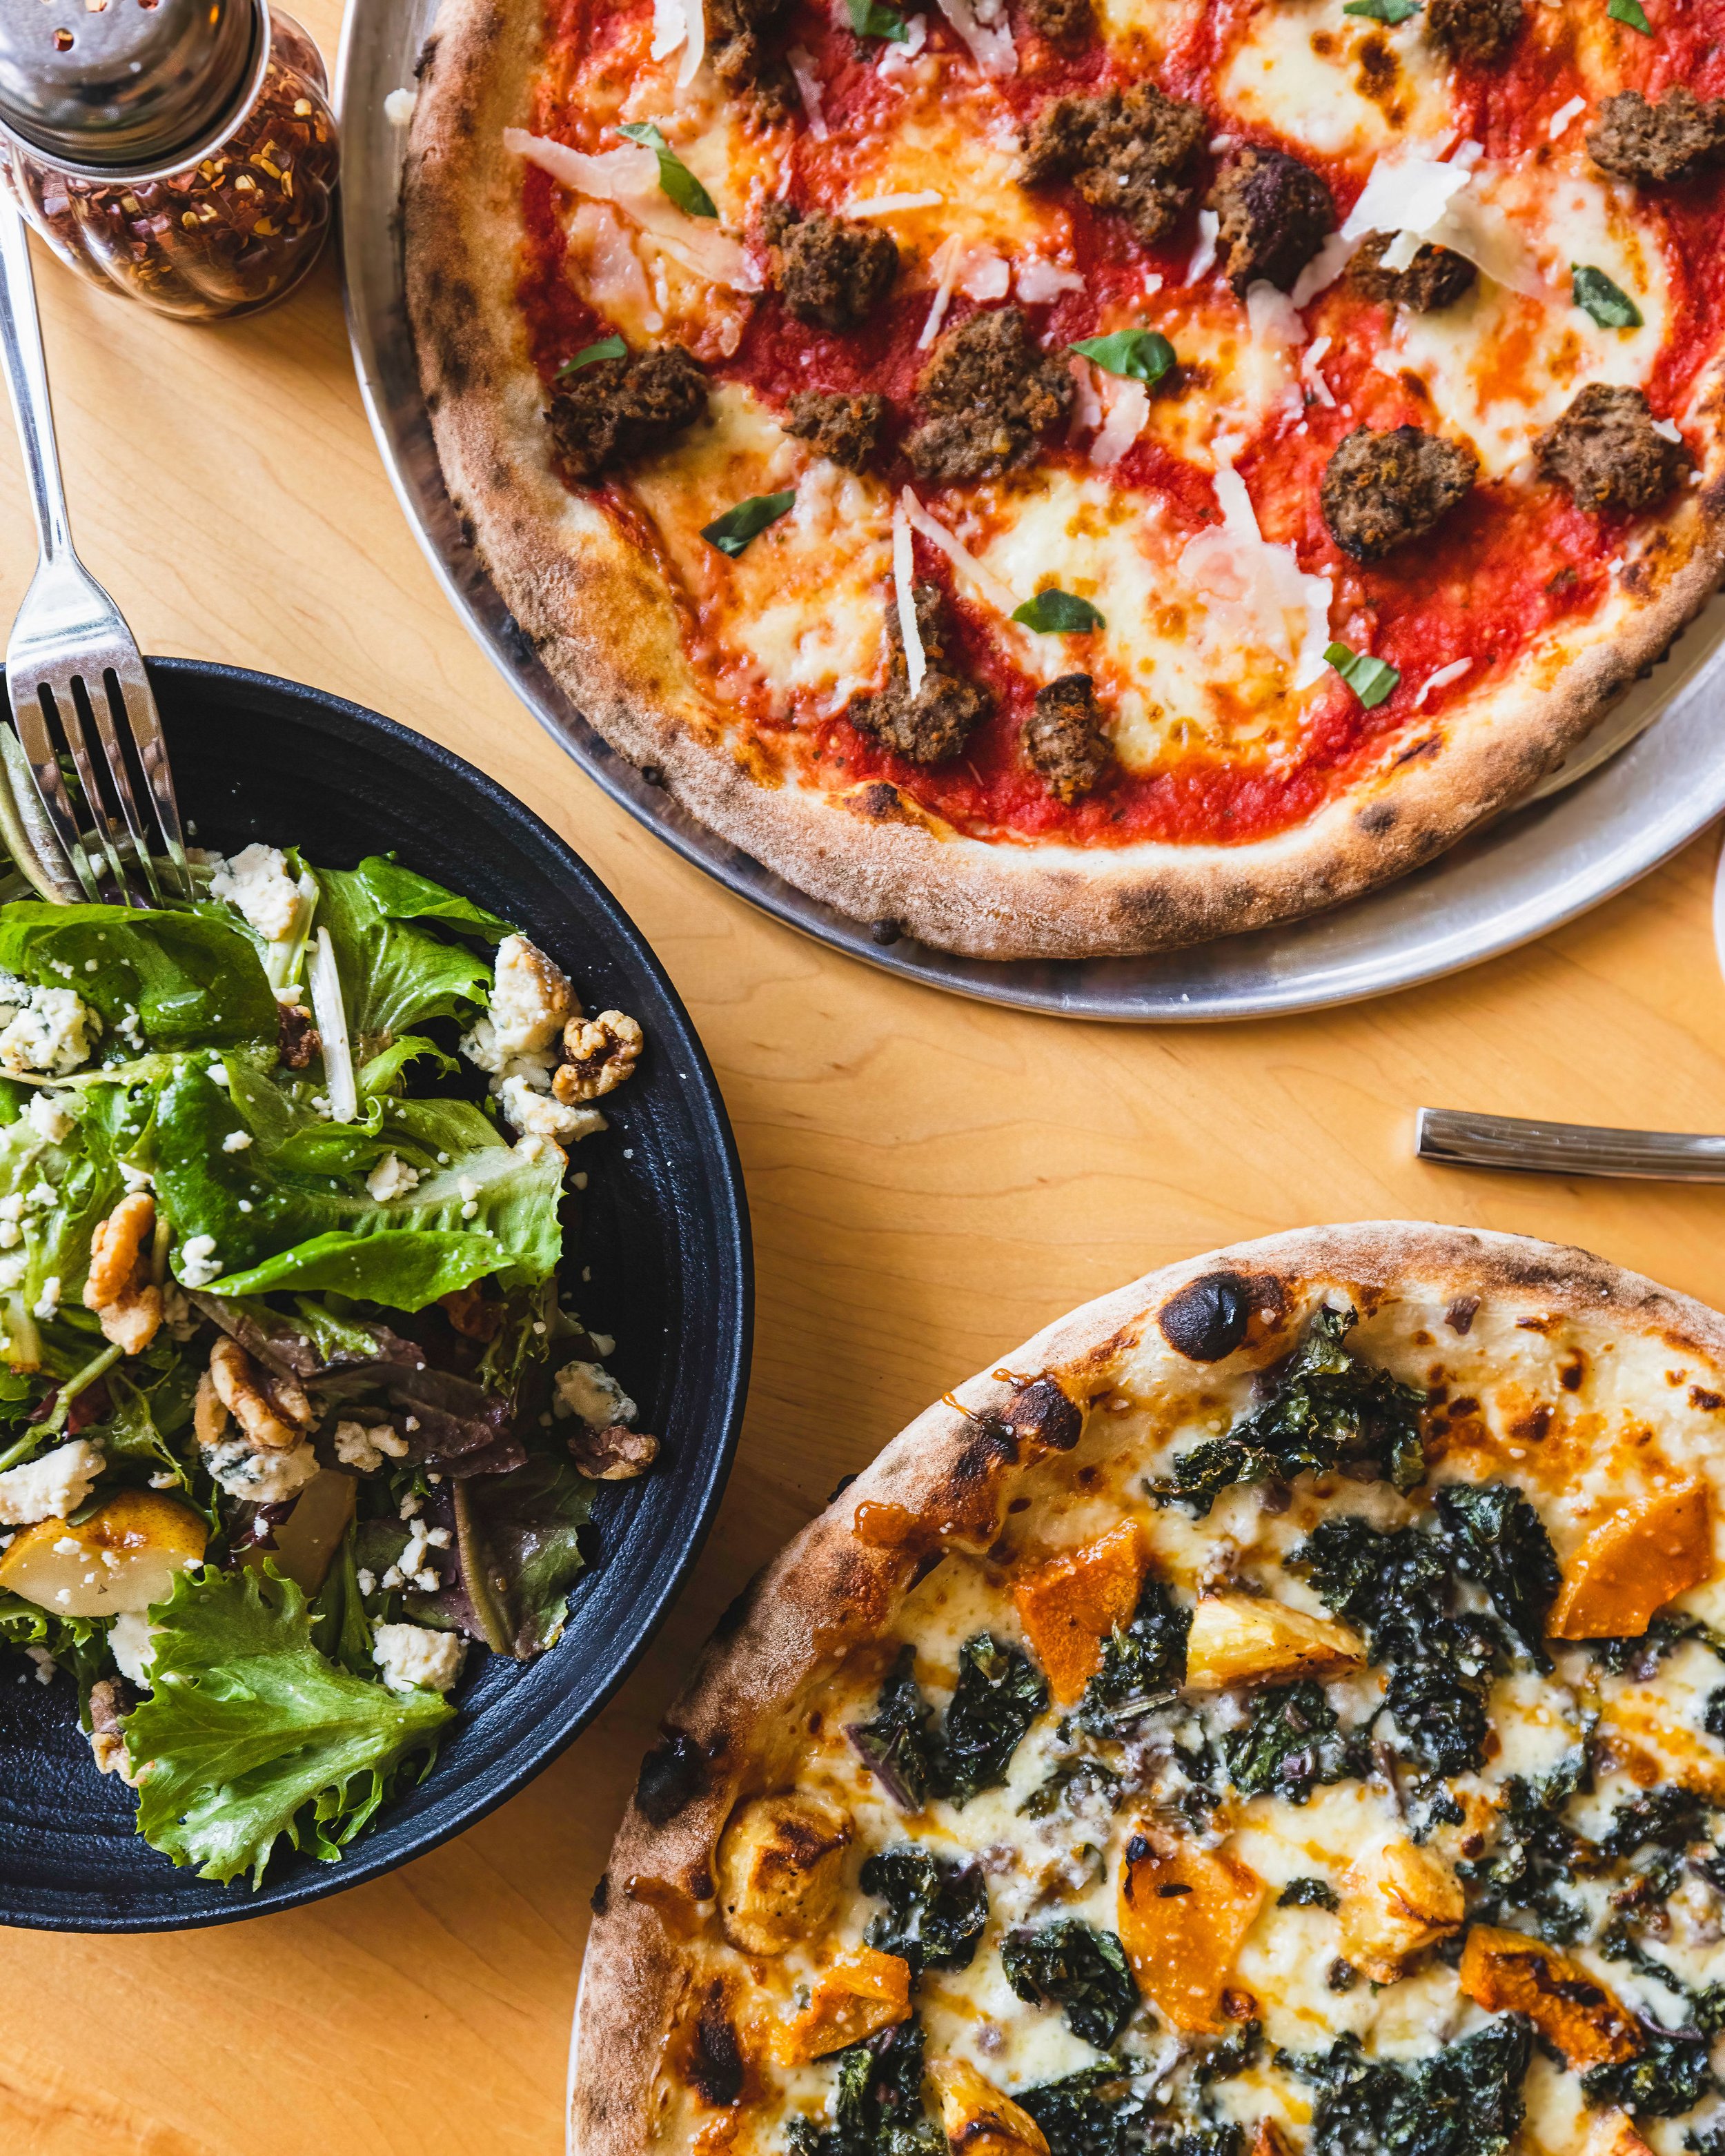 Woodfired-Pizza-and-salad.jpg